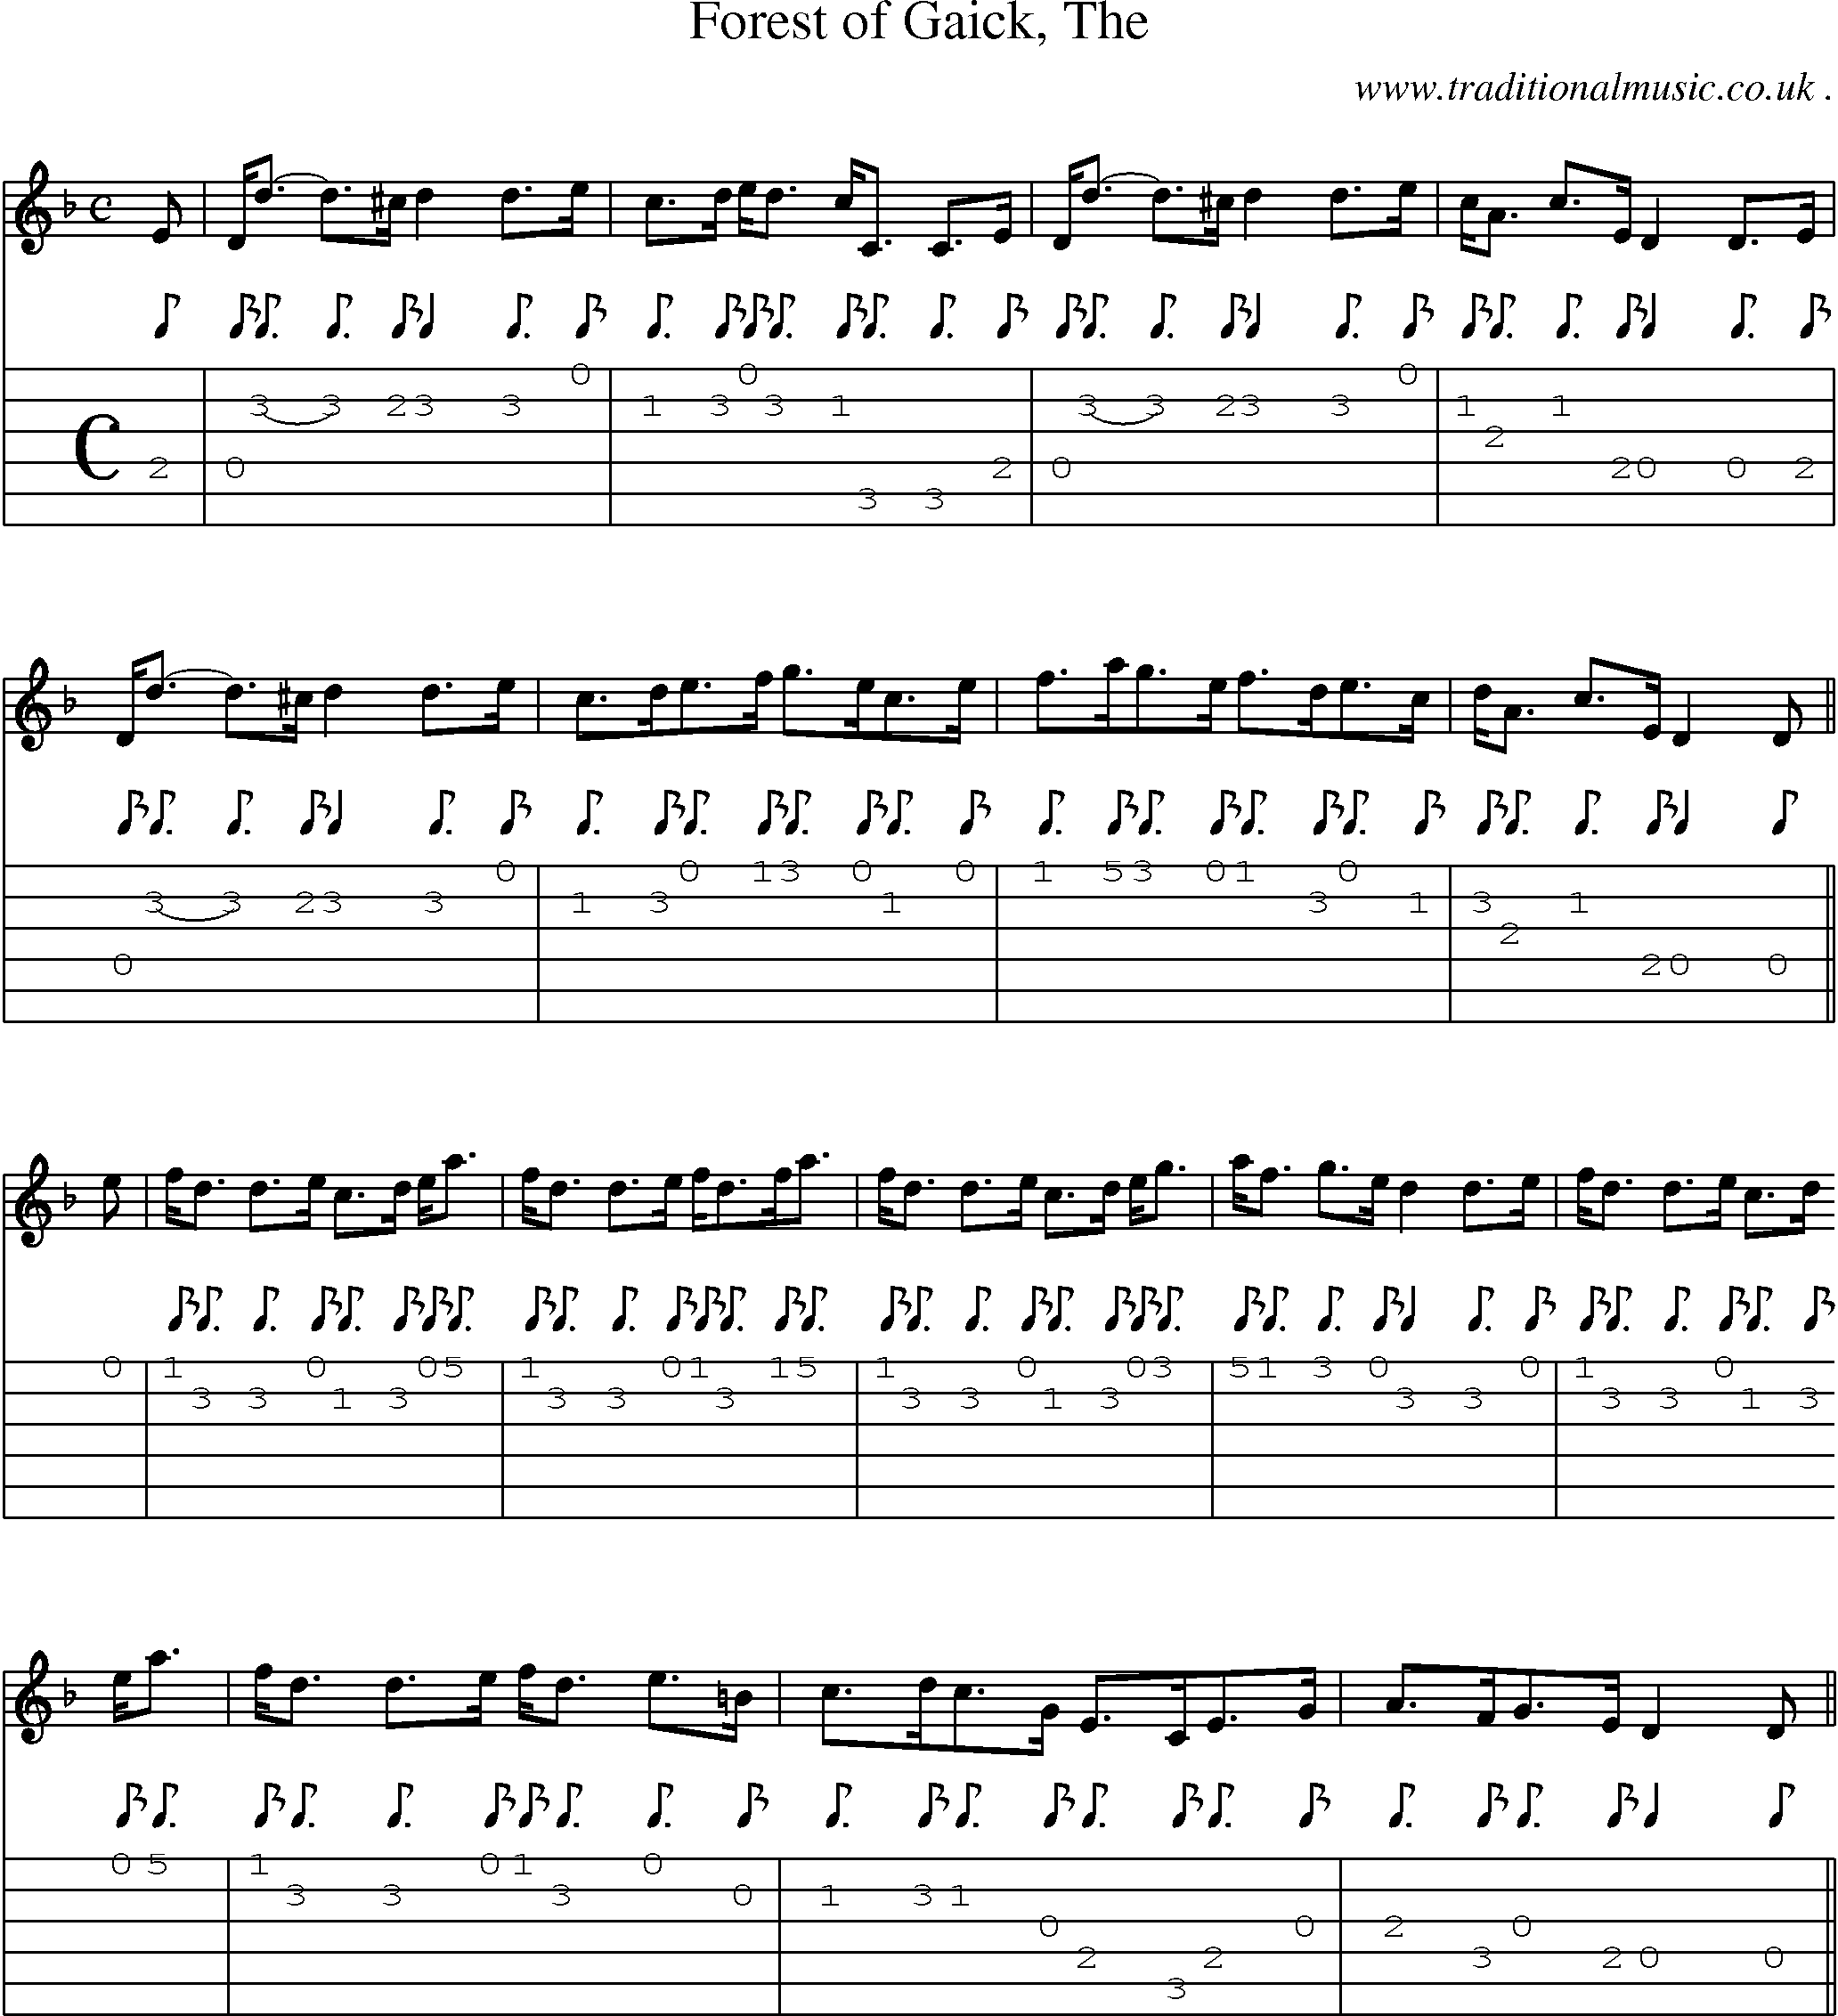 Sheet-music  score, Chords and Guitar Tabs for Forest Of Gaick The